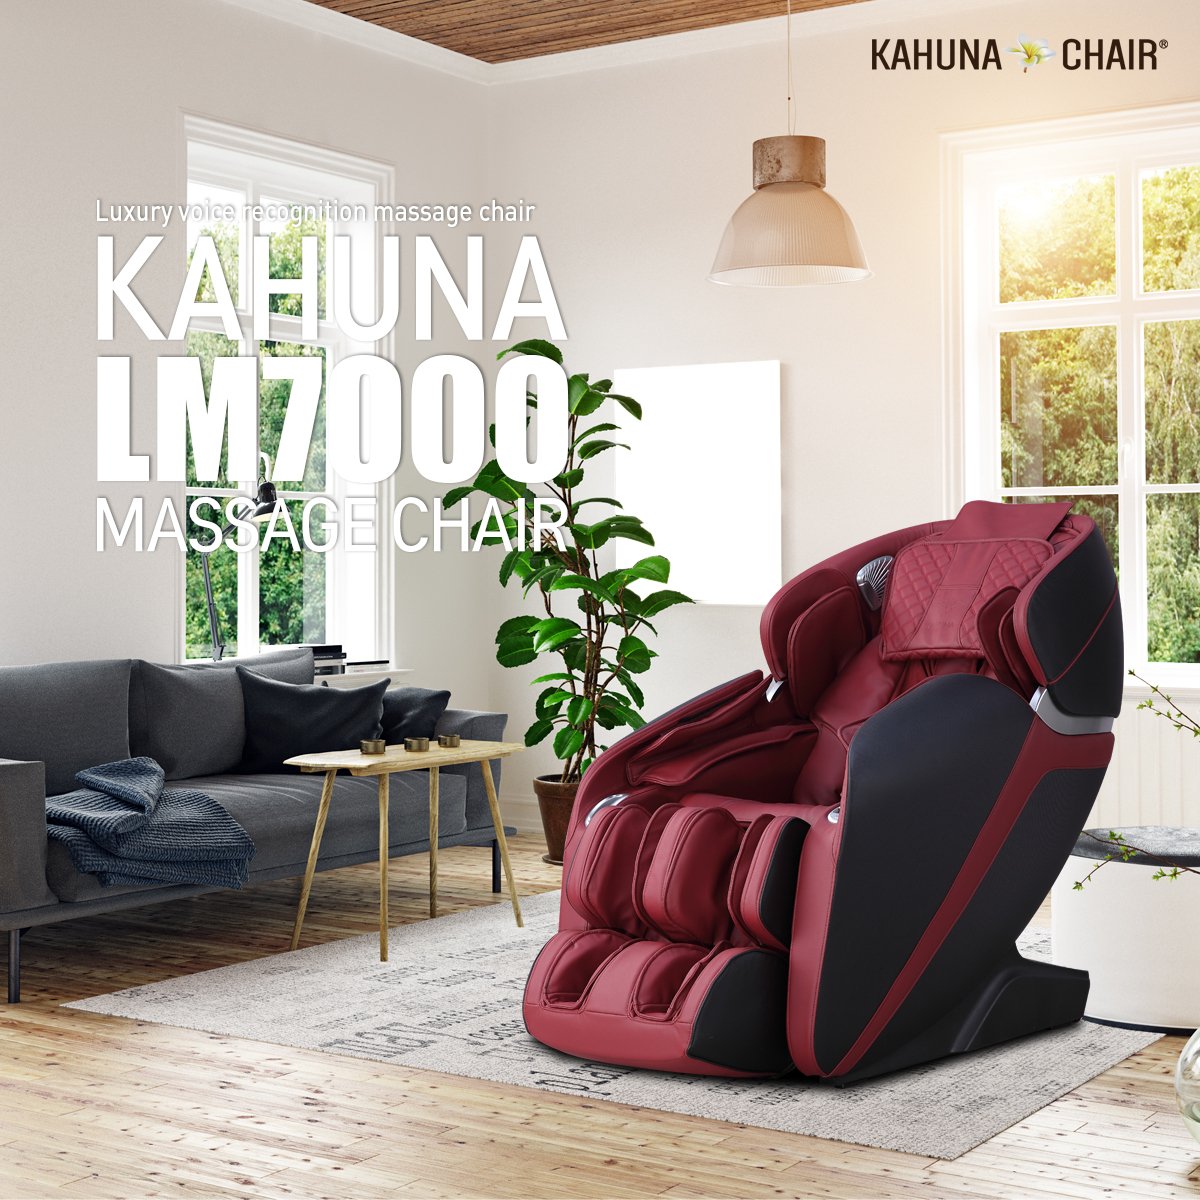 Kahuna LM7000 Luxury voice recognition massage chair